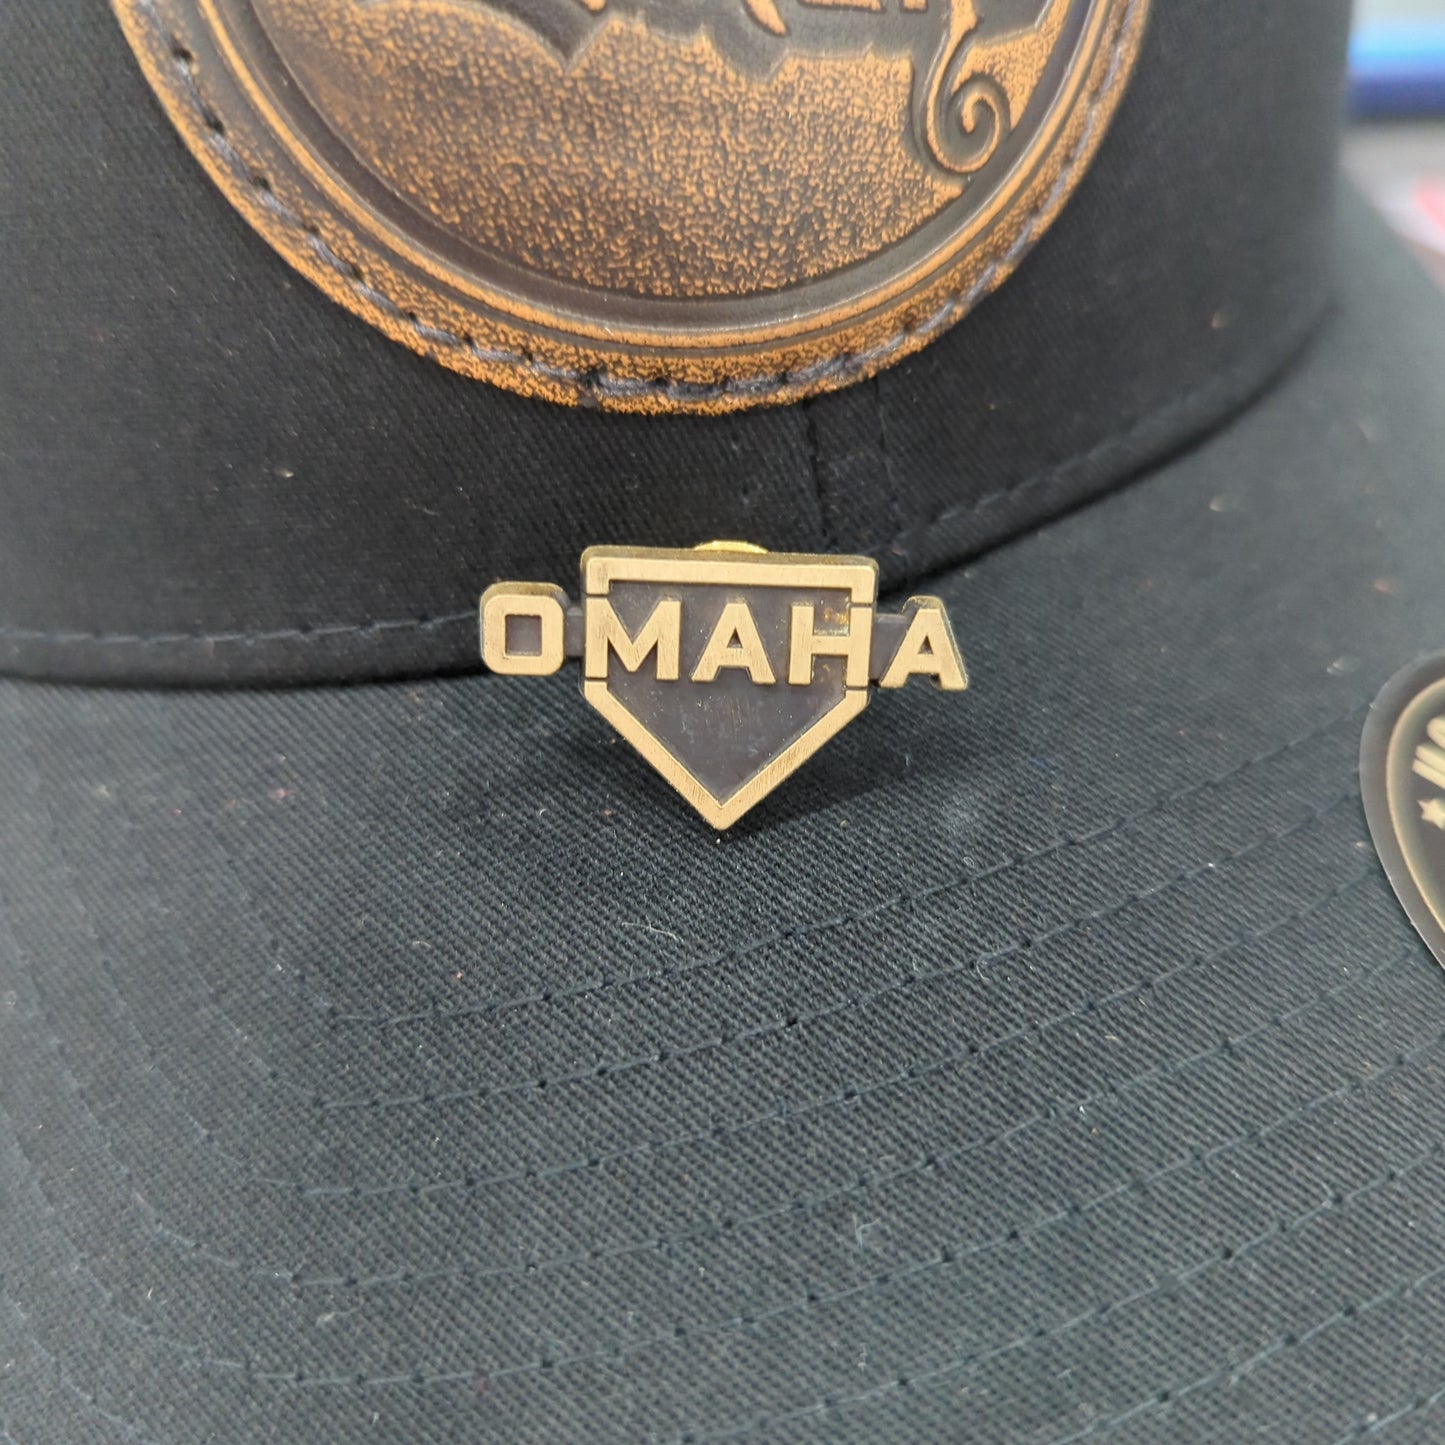 Omaha home plate hat pin